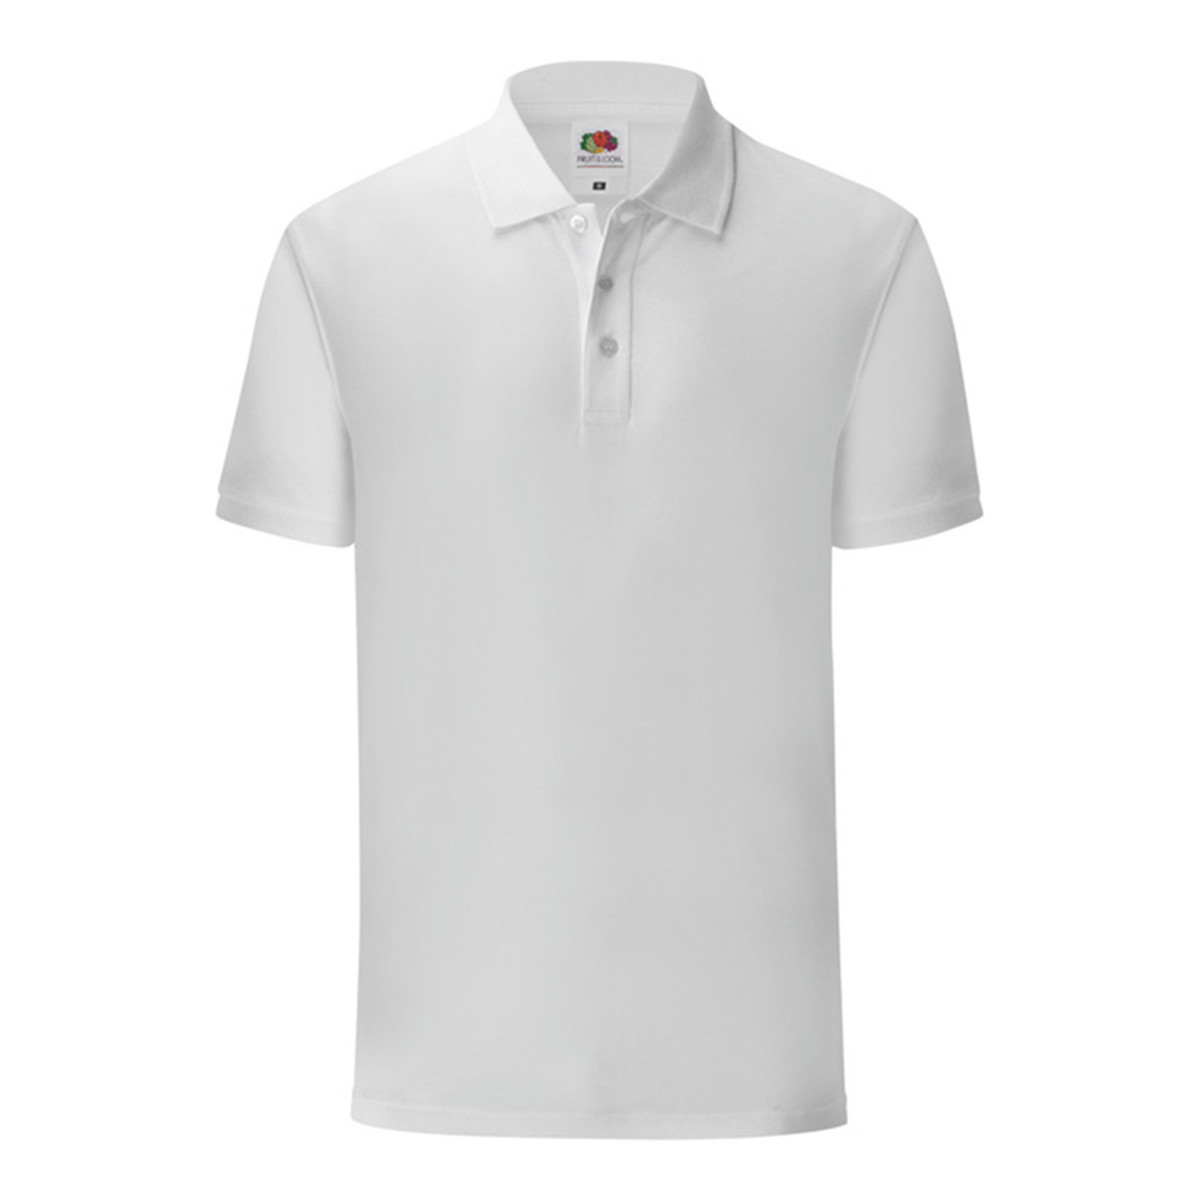 Vêtements Homme T-shirts & Polos Fruit Of The Loom Iconic Blanc